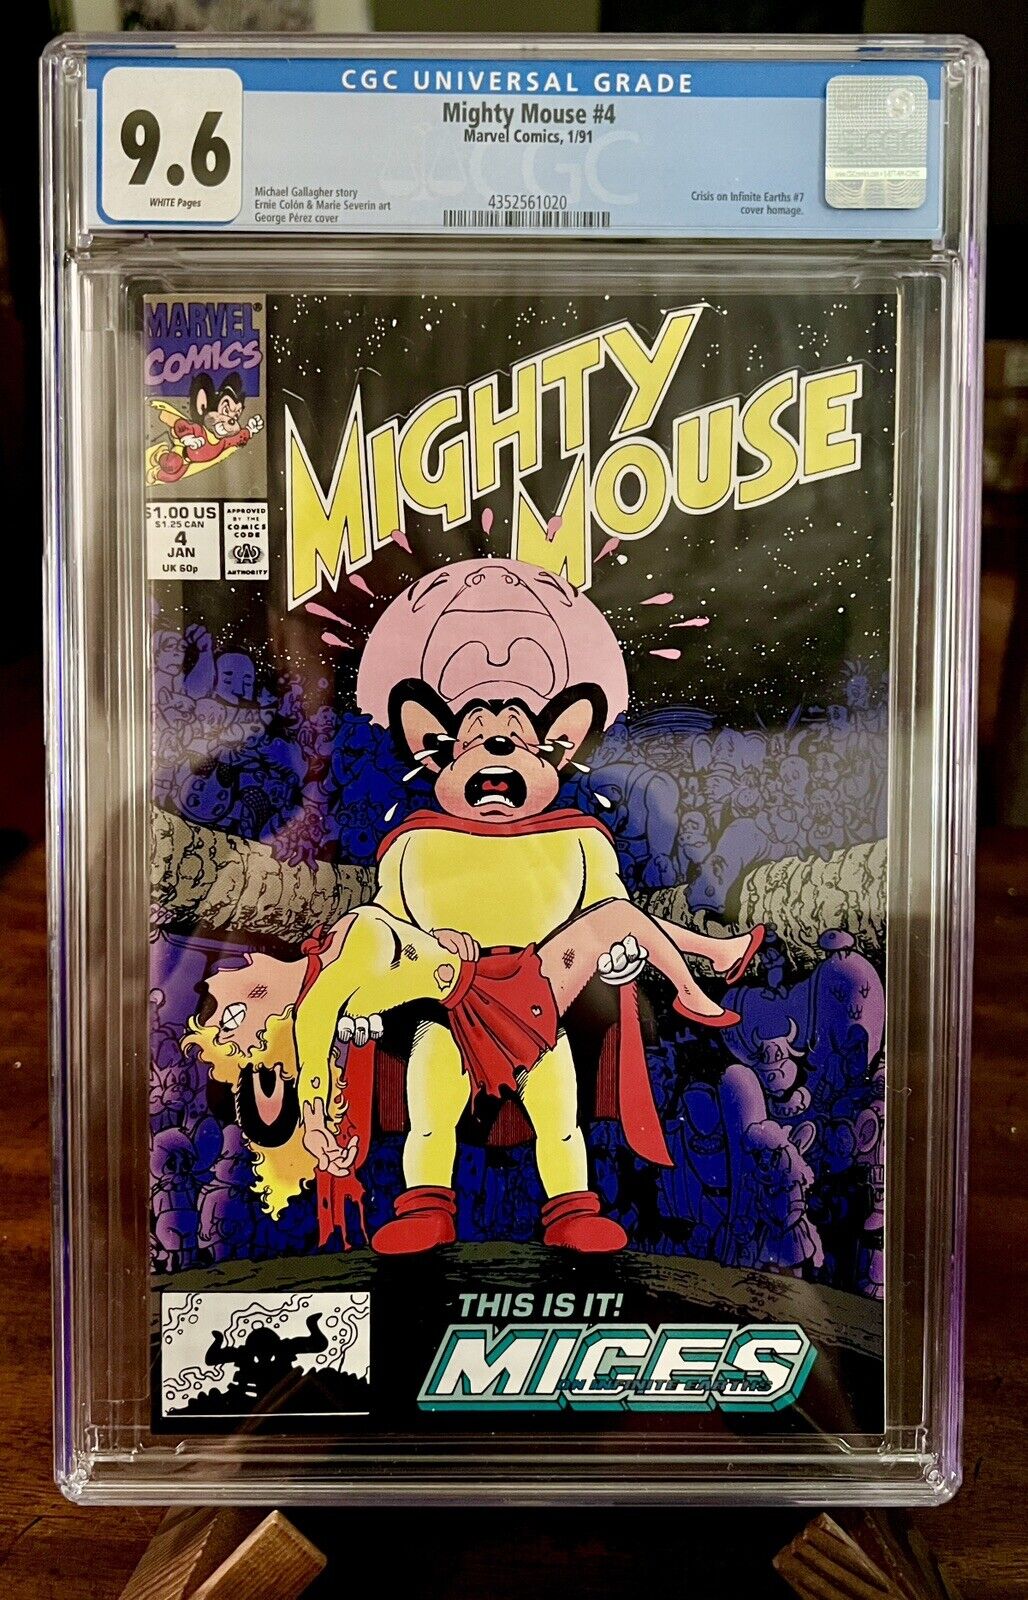 Mighty Mouse #4 - CGC 9.6 - Homage to George Perez's Crisis on Infinite Earths